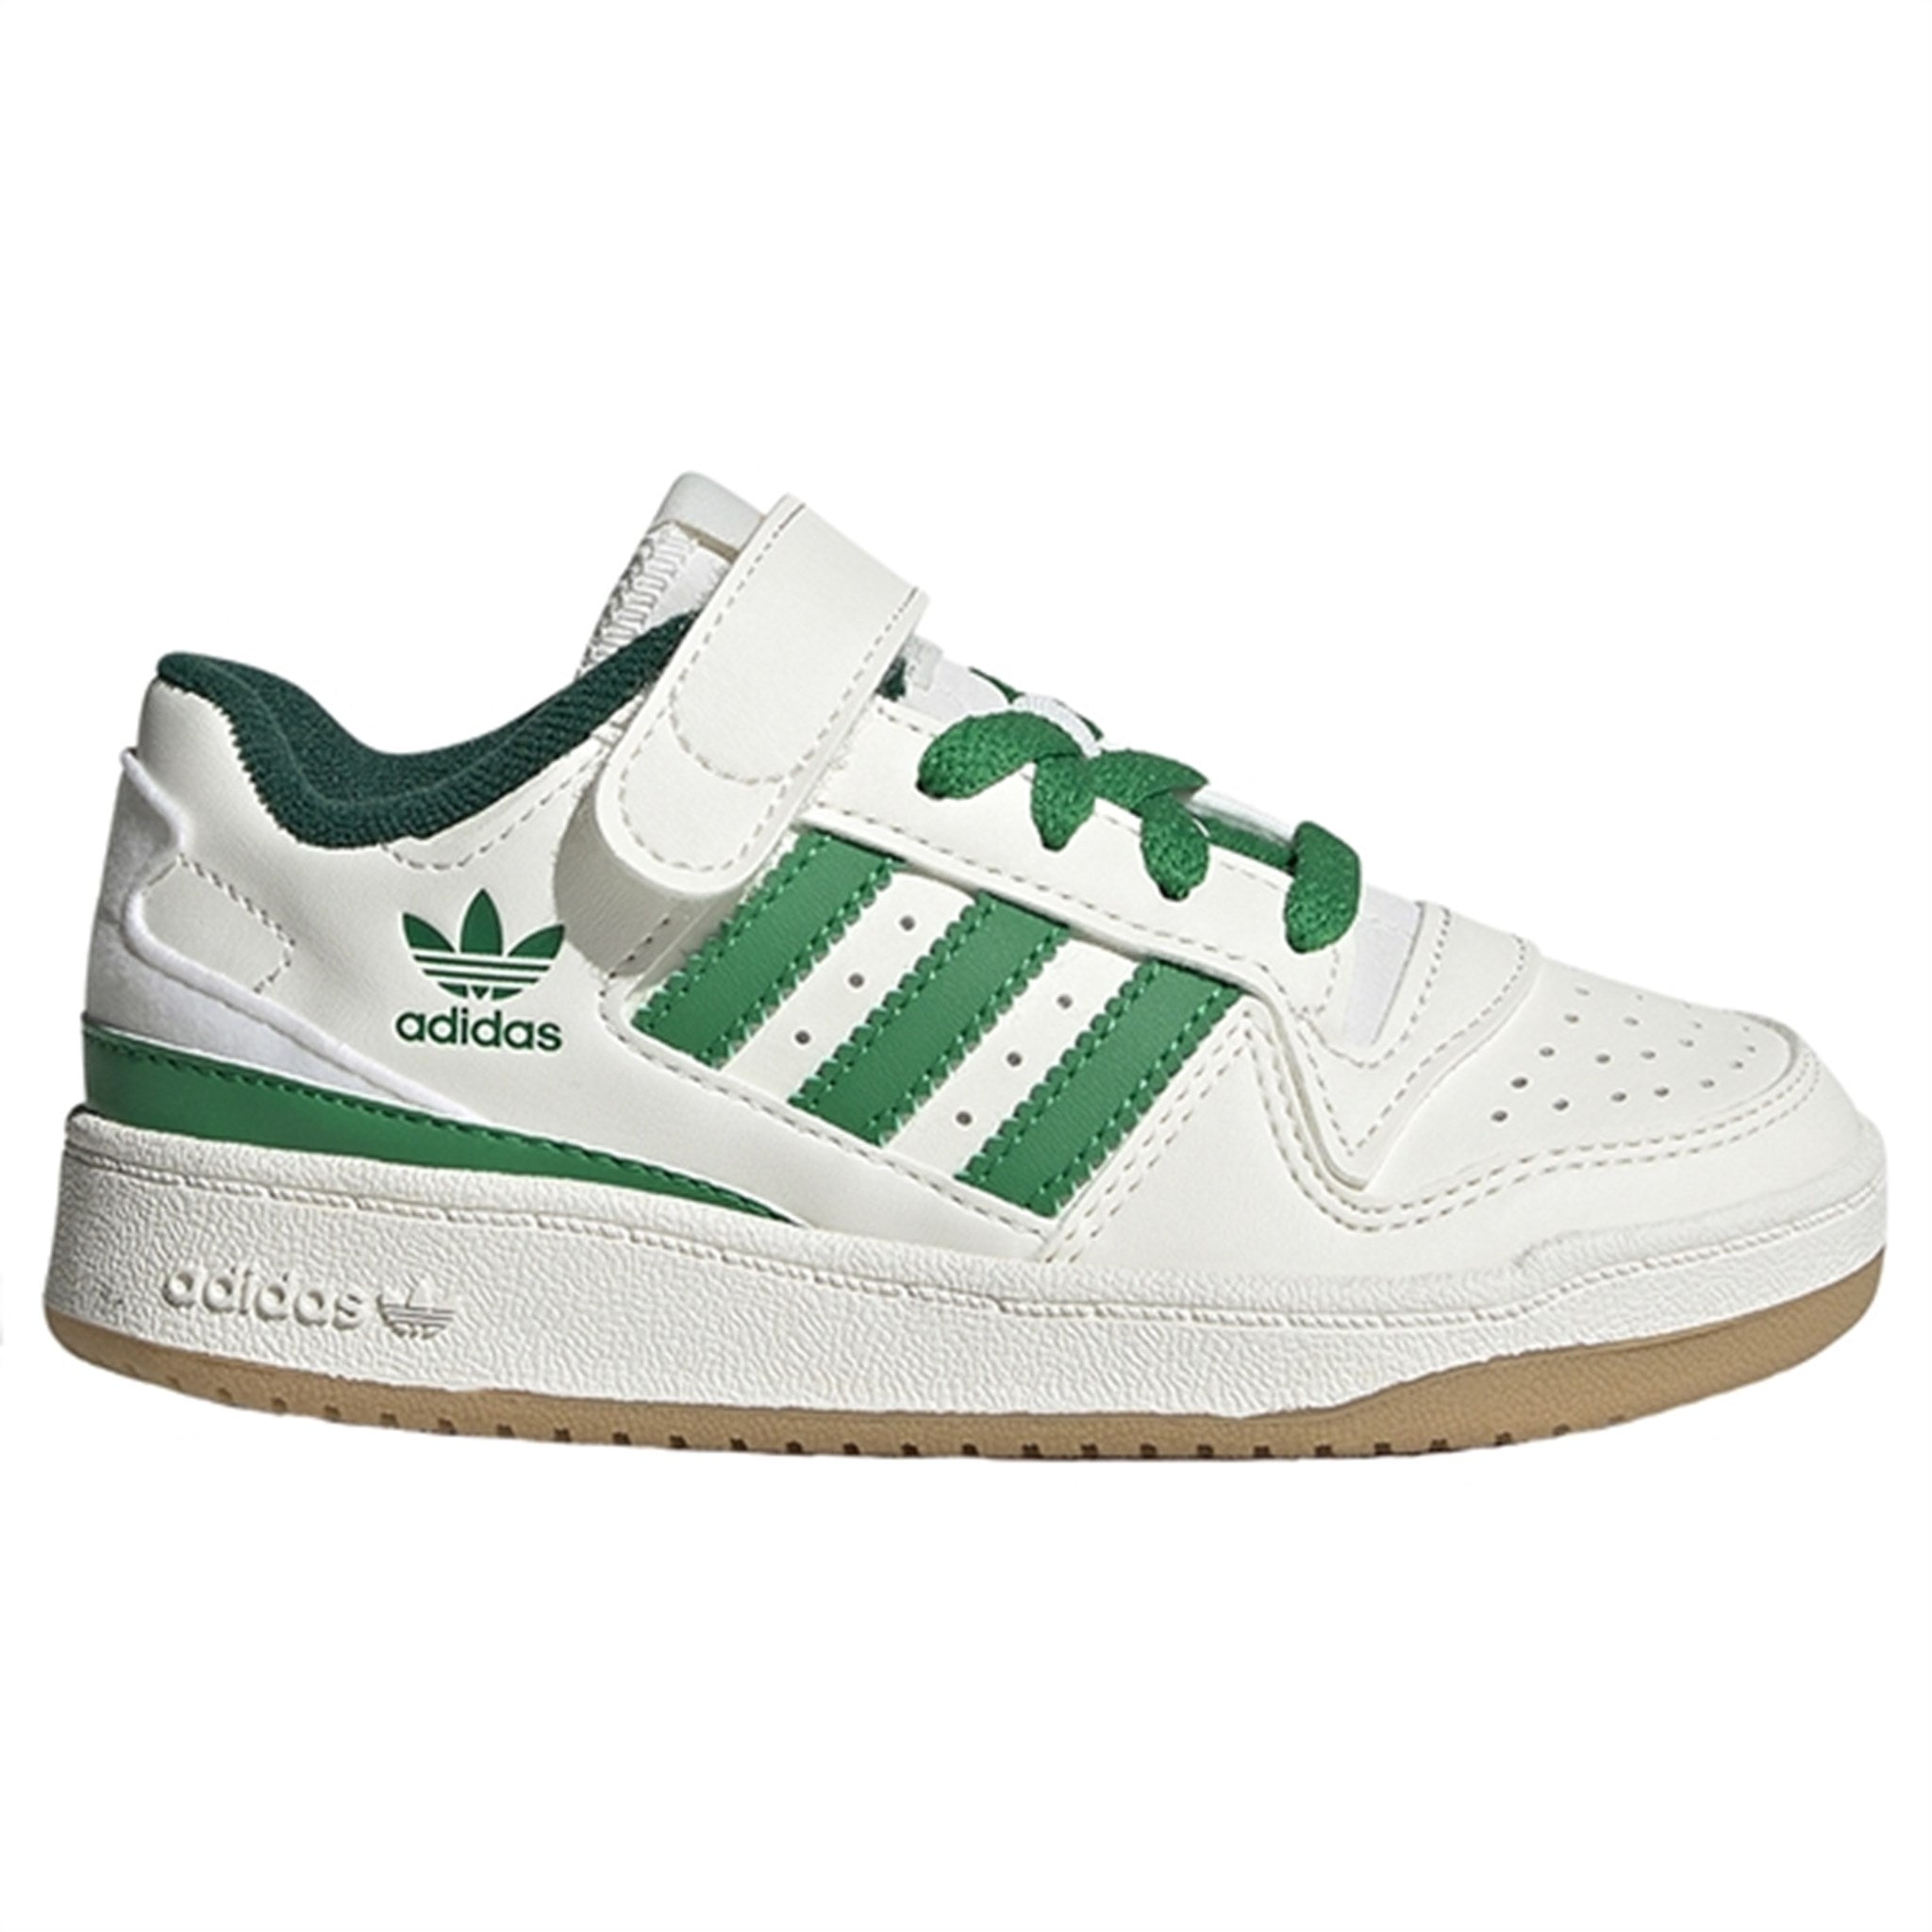 adidas Basketball Forum Low C Sneakers White / Green